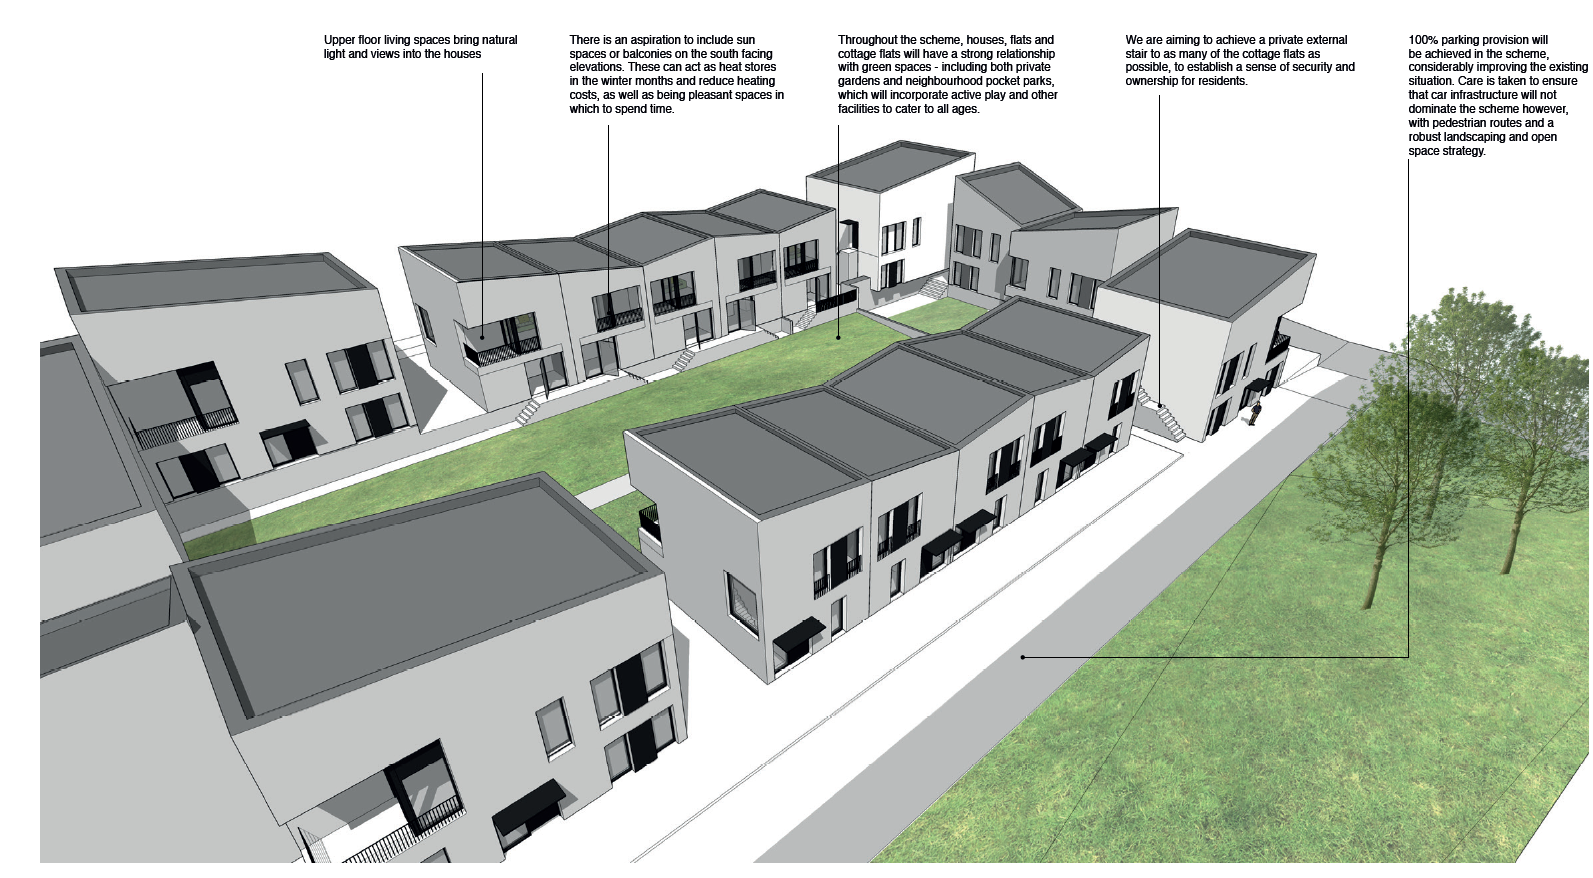 An example of what the new homes in the area would look like.